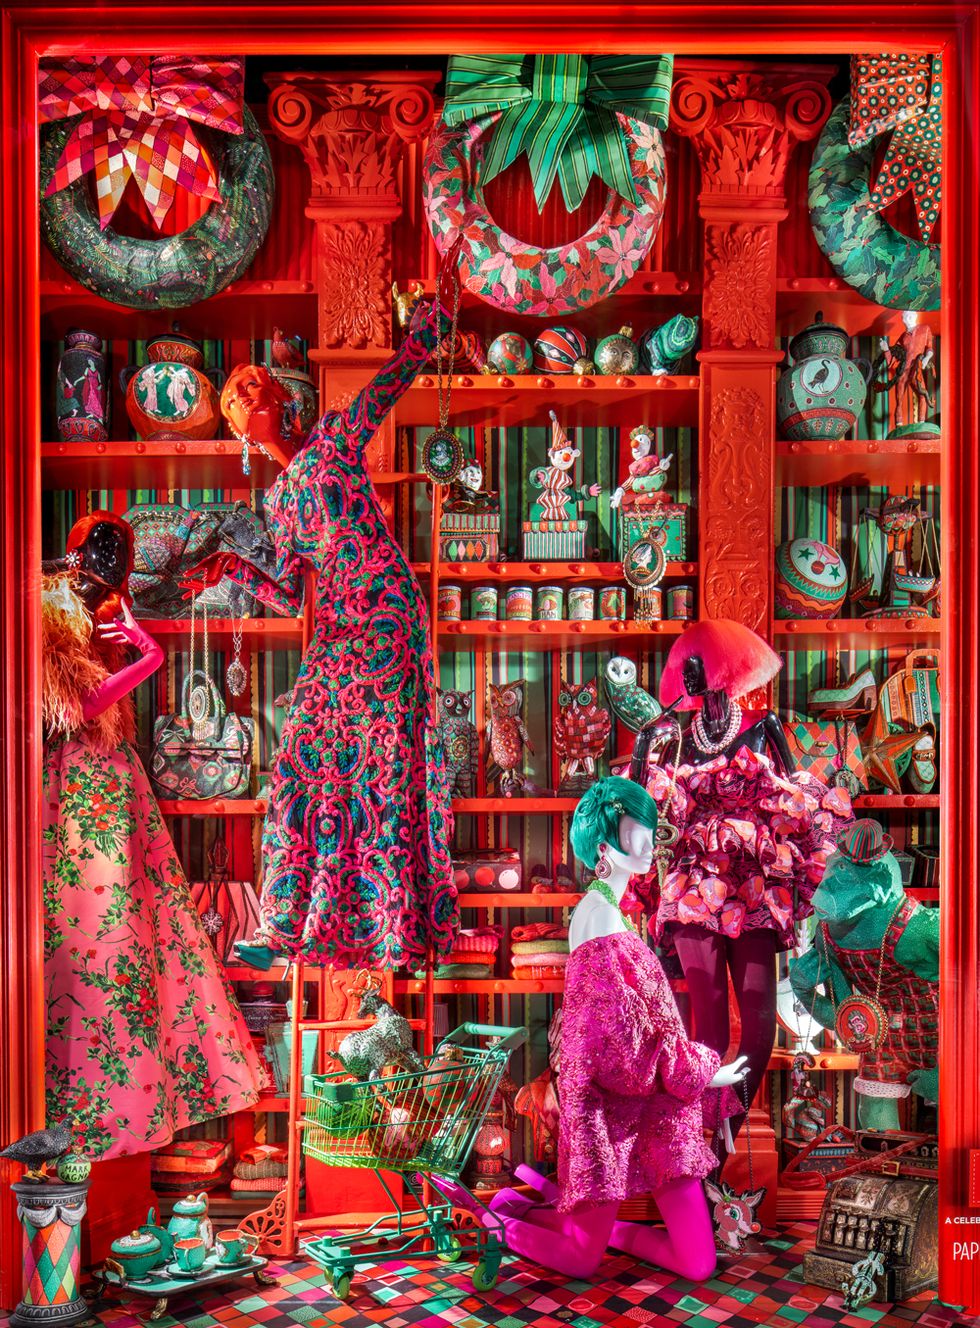 NYC's holiday windows celebrate city's resilience in 2021